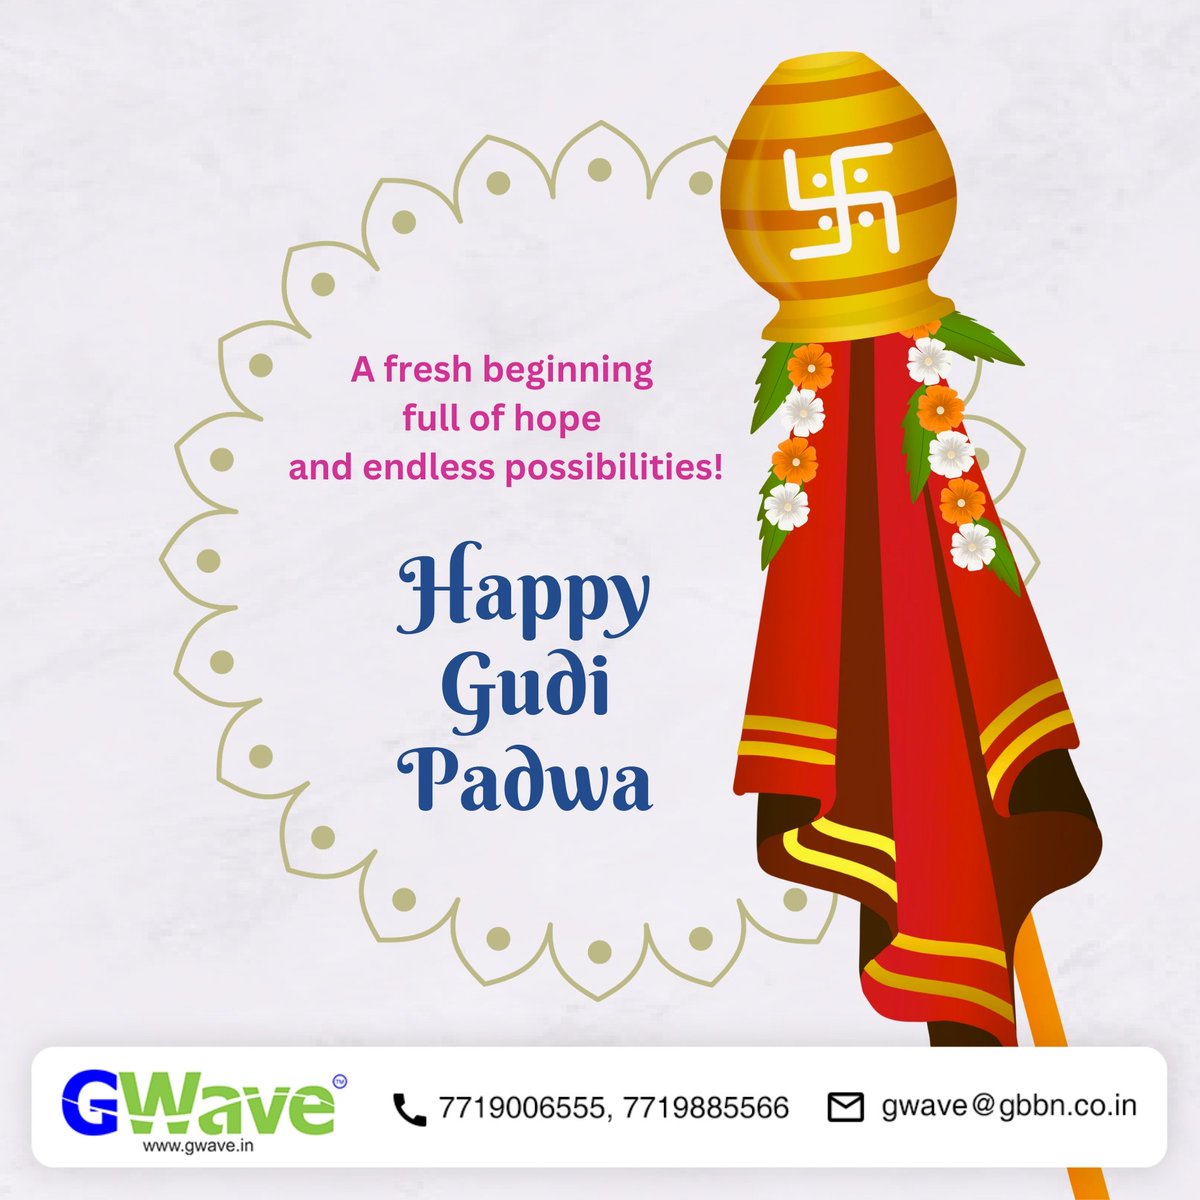 Let the auspicious Gudi rise high, symbolizing victory, courage, and hope. May this new year bring you prosperity, happiness, and success in all your endeavors.🛕🚩

Team GWave wishes you a happy Gudi Padwa!🙏✨

#gudipadwa2023 #navvarsh #hindufestival #festivalsofgoa #gwave